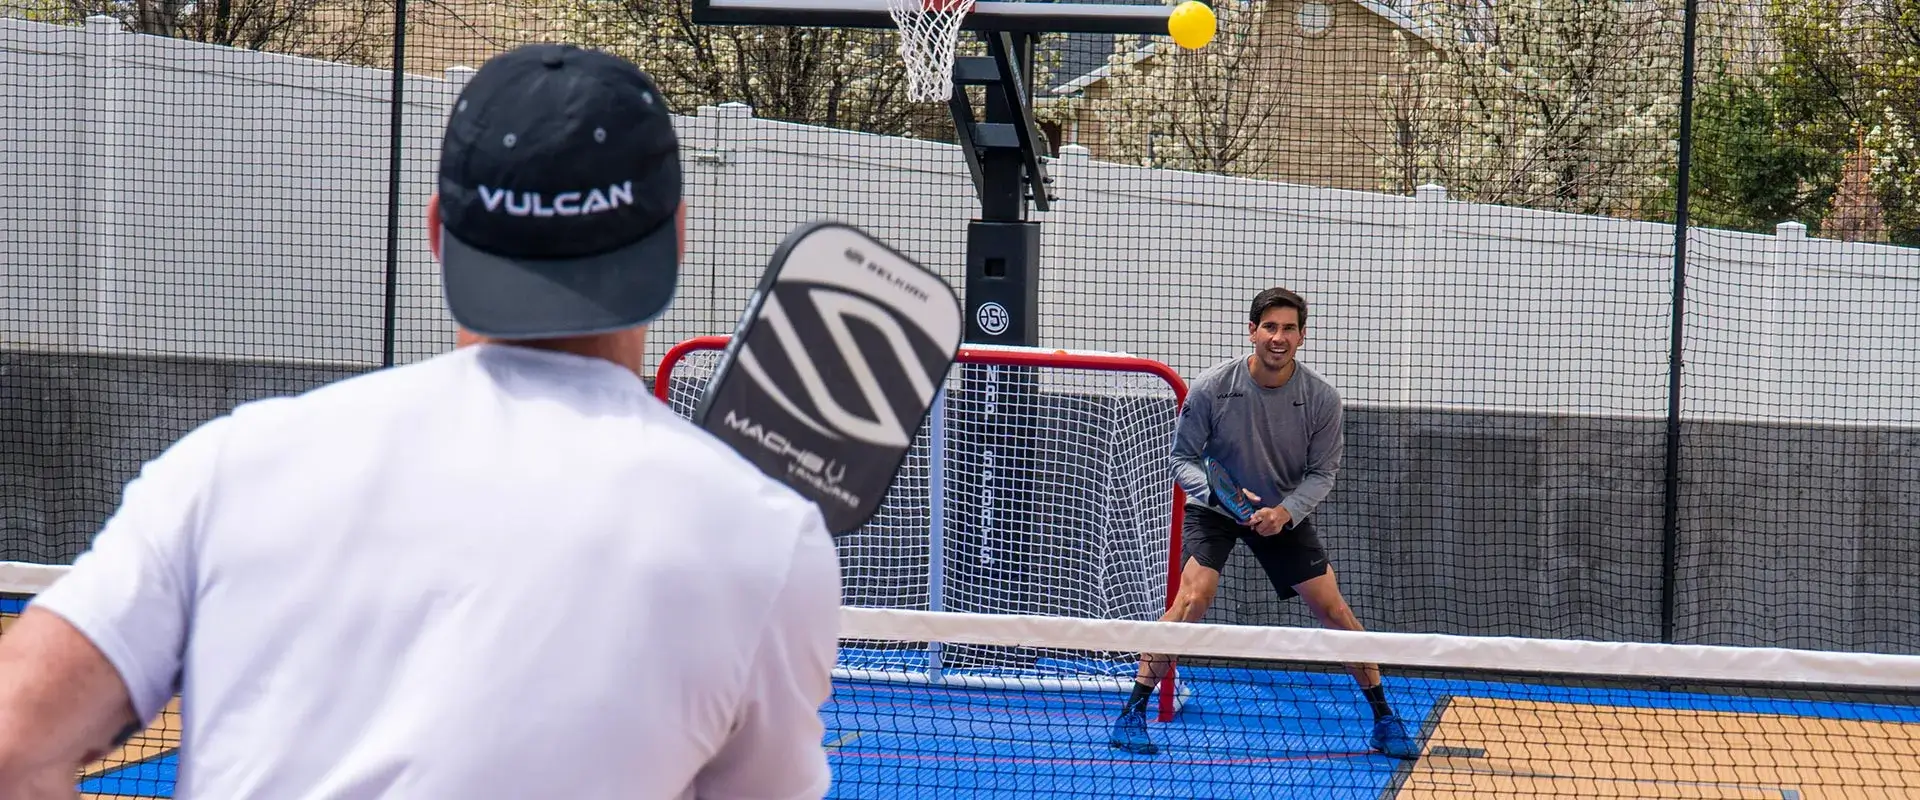 Tyler Loong and friend play pickleball on a backyard multi-court